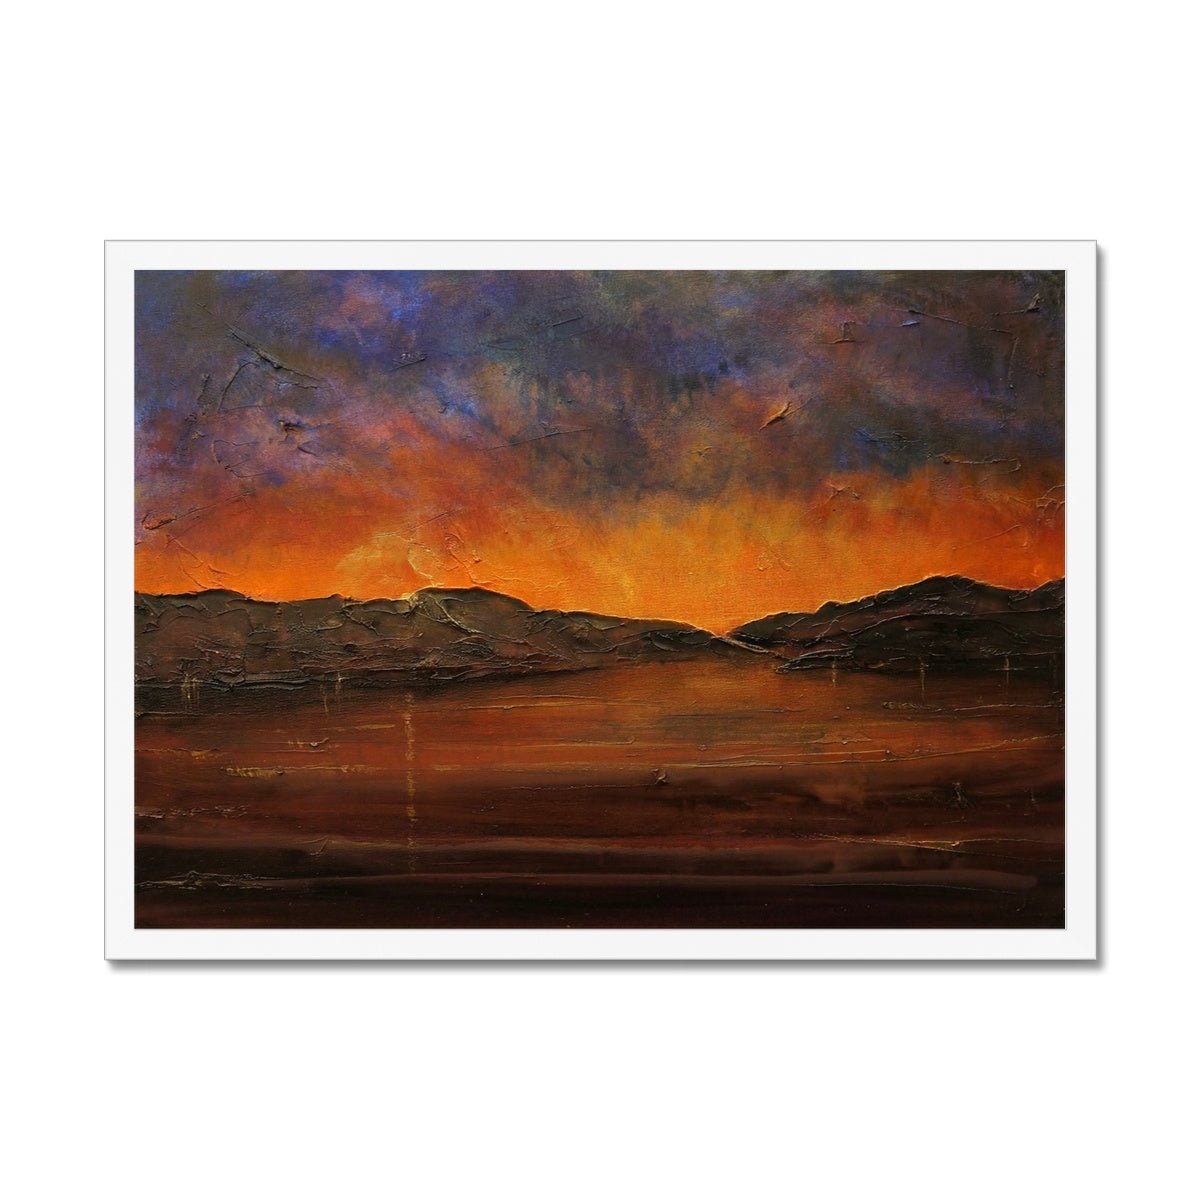 A Brooding River Clyde Dusk Painting | Framed Prints From Scotland-Framed Prints-River Clyde Art Gallery-A2 Landscape-White Frame-Paintings, Prints, Homeware, Art Gifts From Scotland By Scottish Artist Kevin Hunter